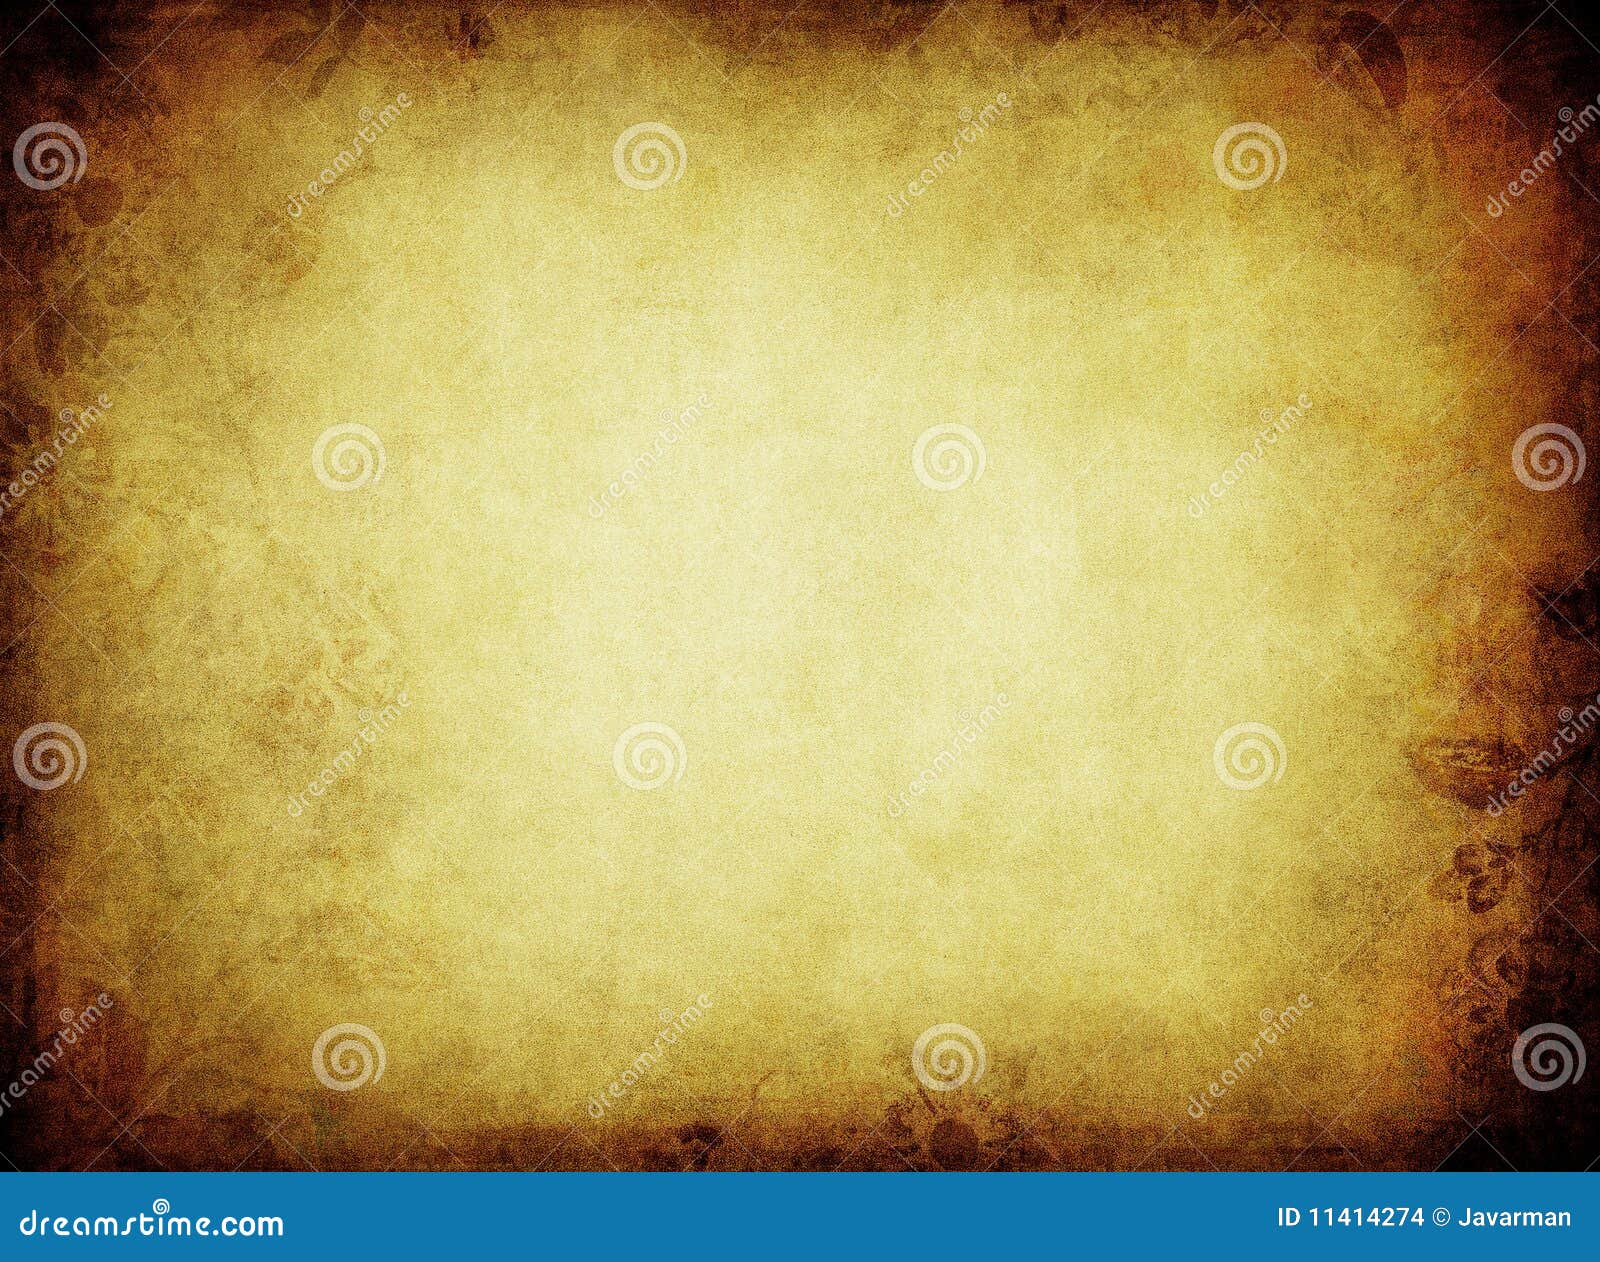 Grunge Floral Background With Space For Text Stock Images ...